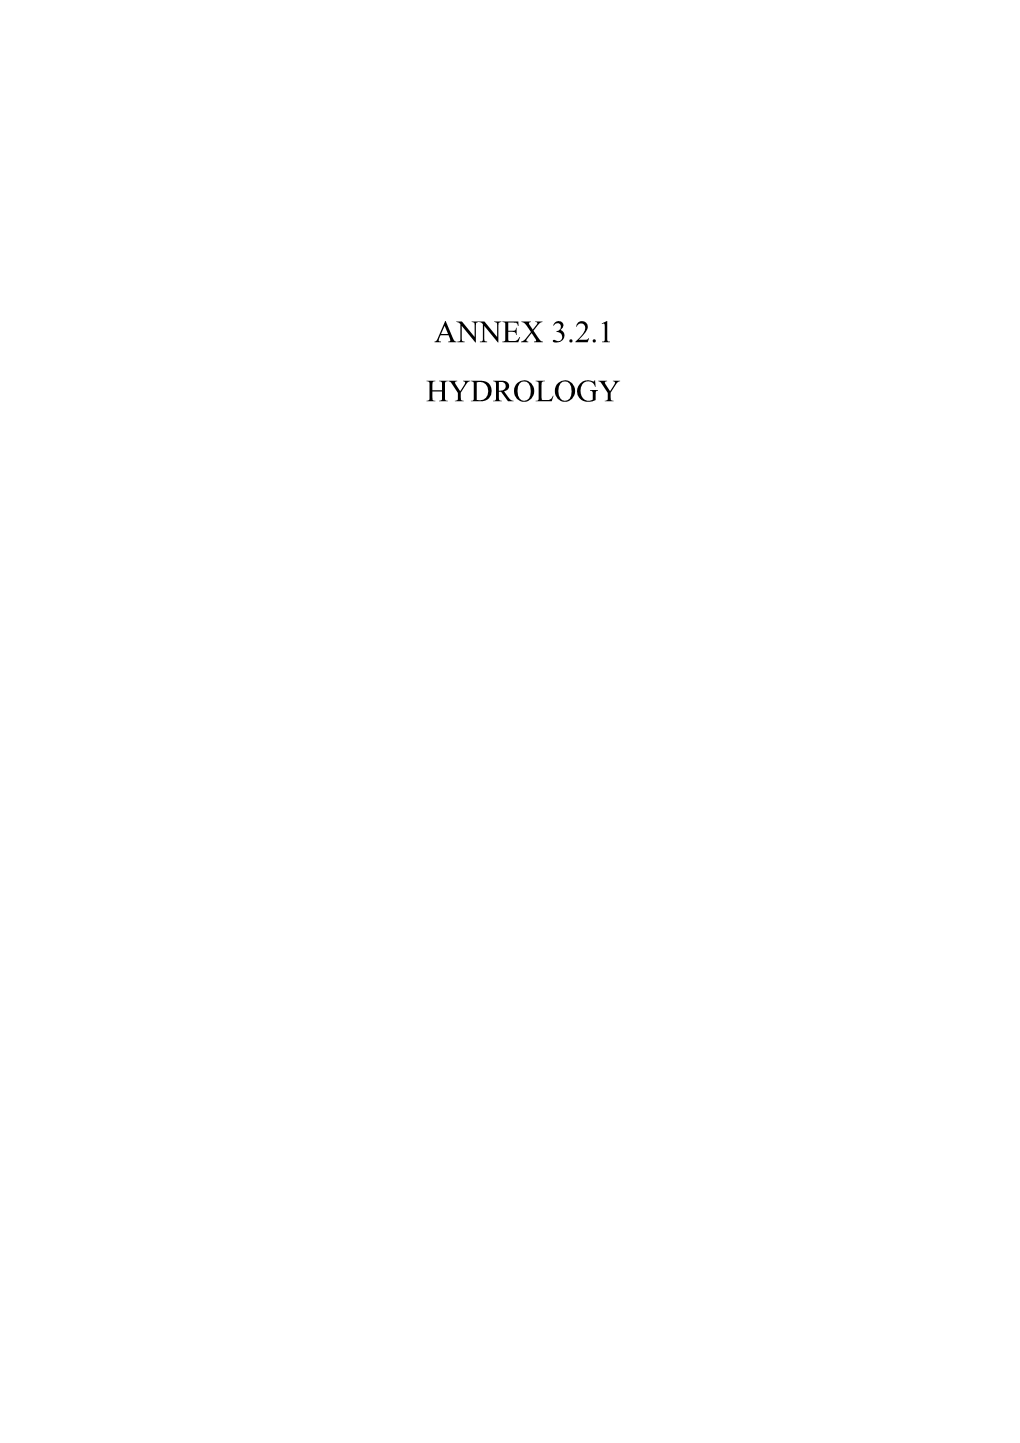 Annex 3.2.1 Hydrology the Study on Water Supply System for Siem Reap Region in Cambodia